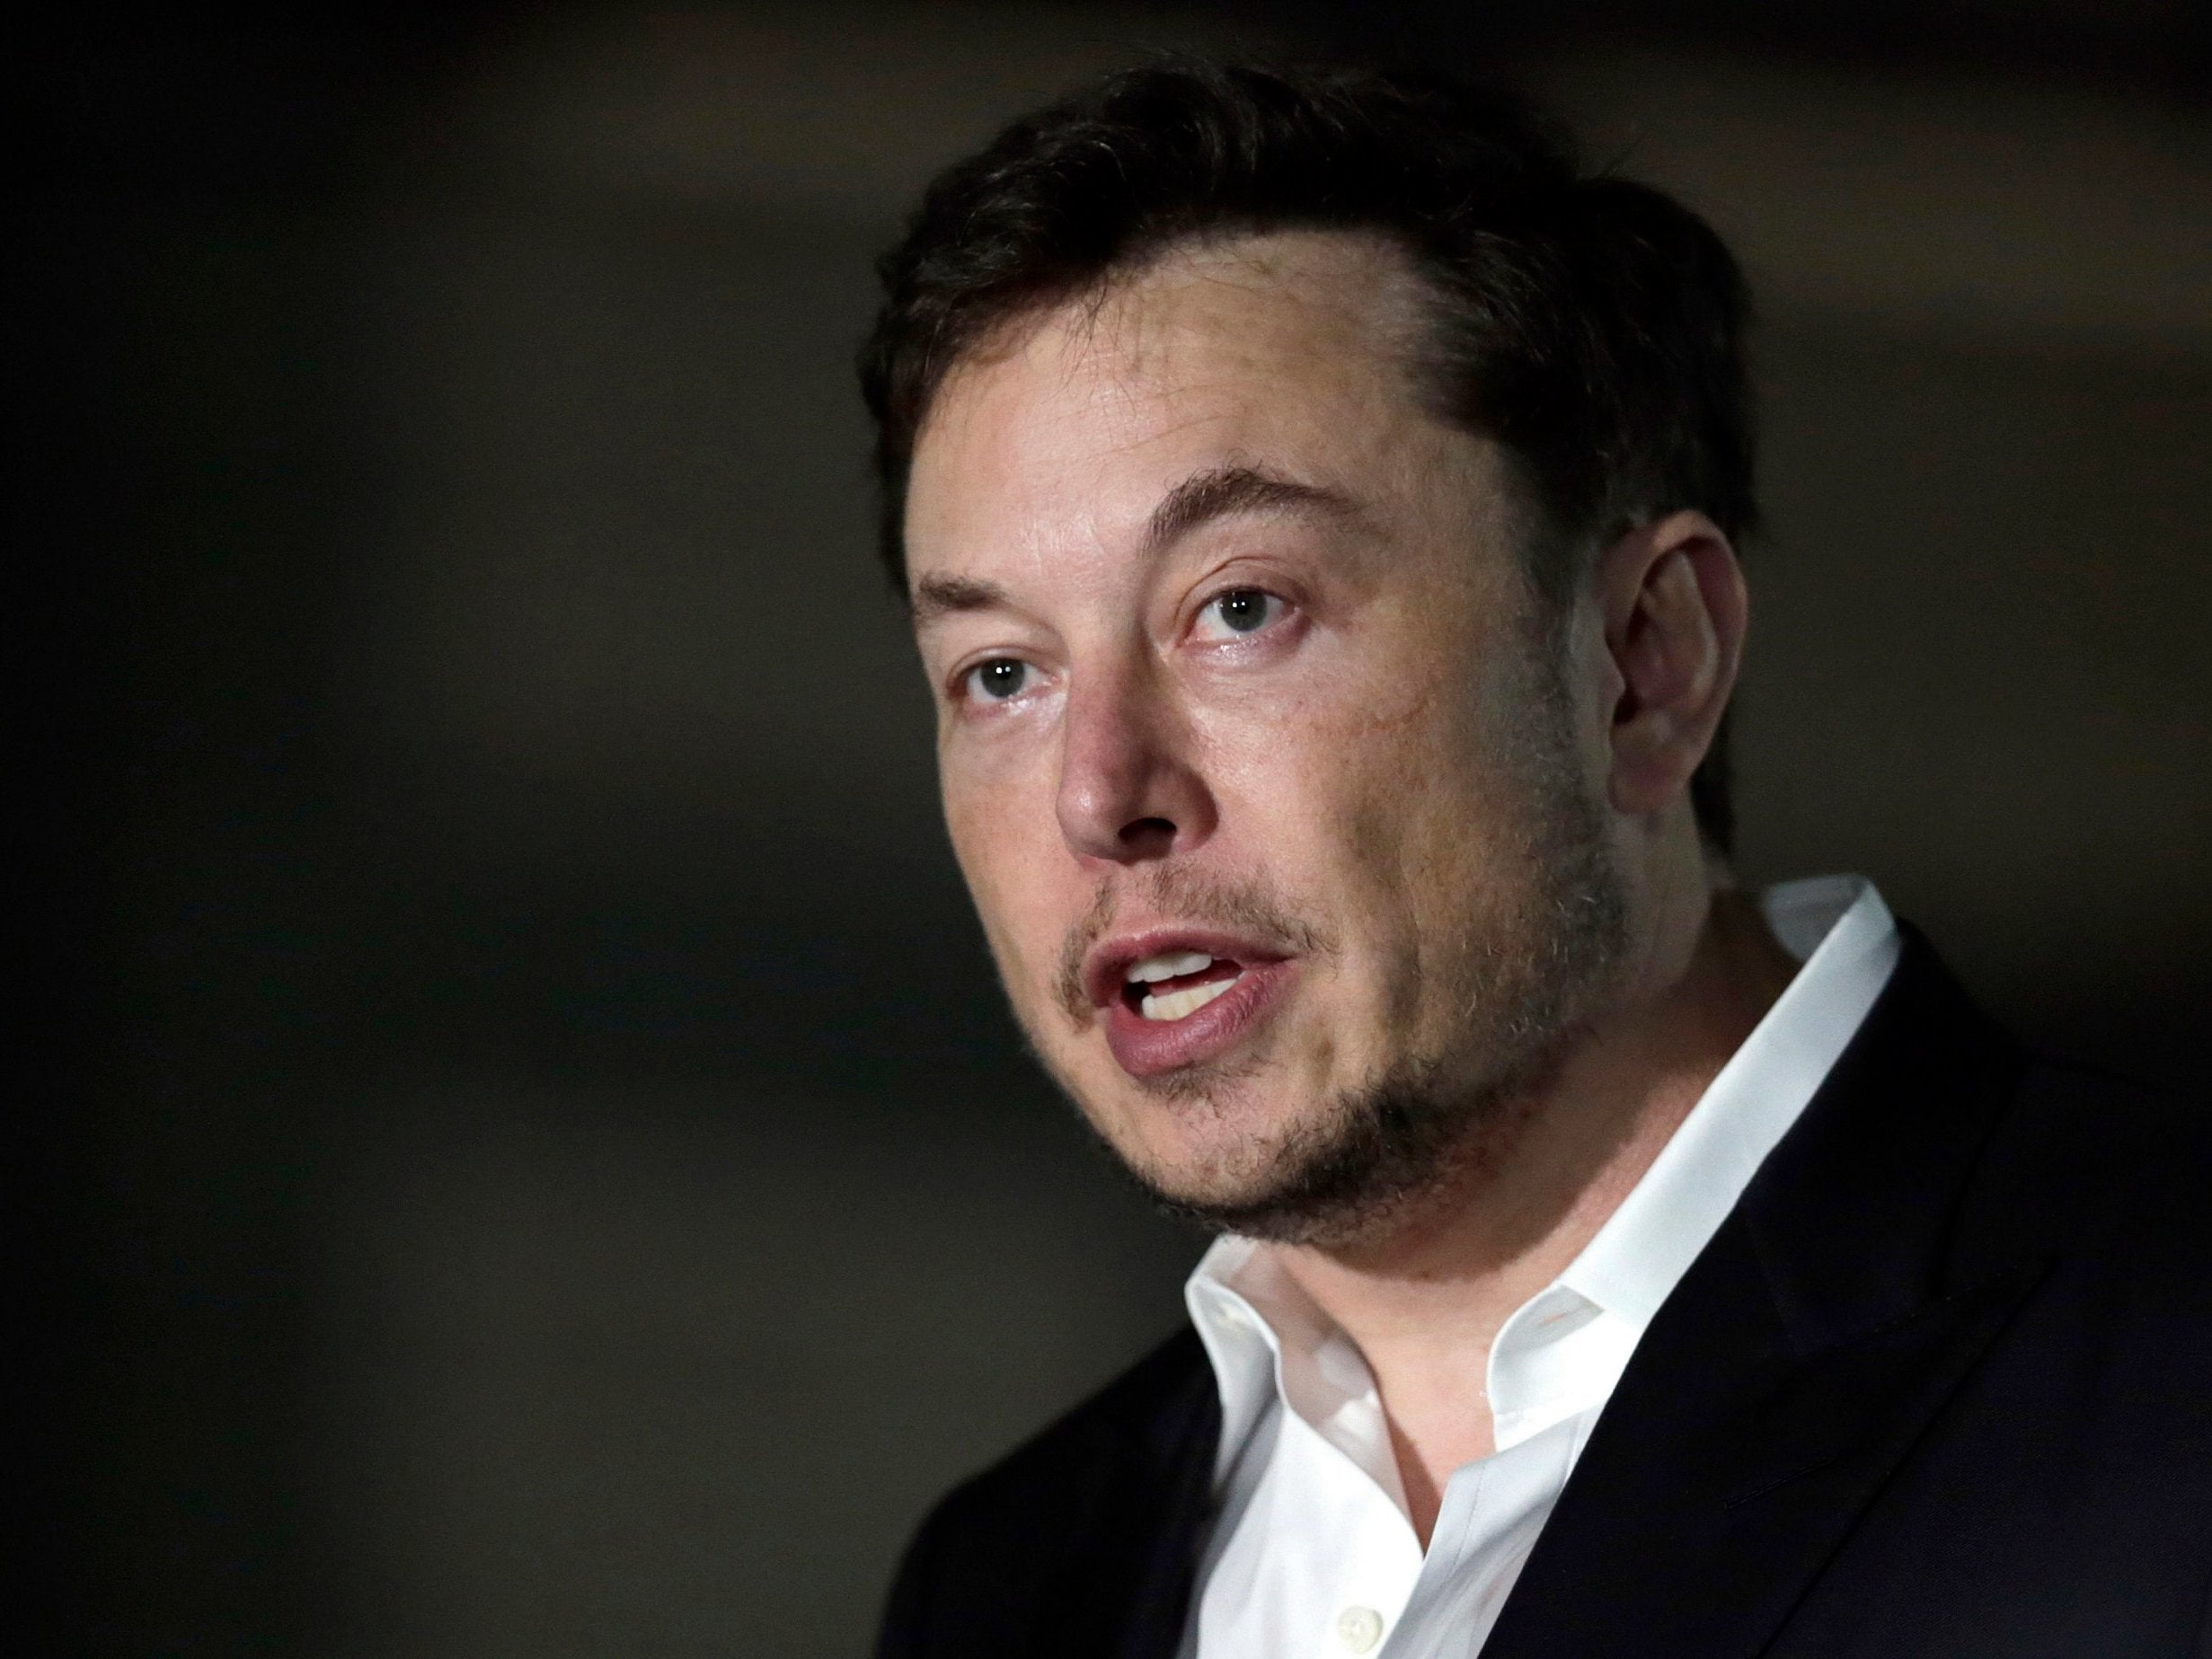 Tesla chief executive Elon Musk speaks at a news conference in Chicago.